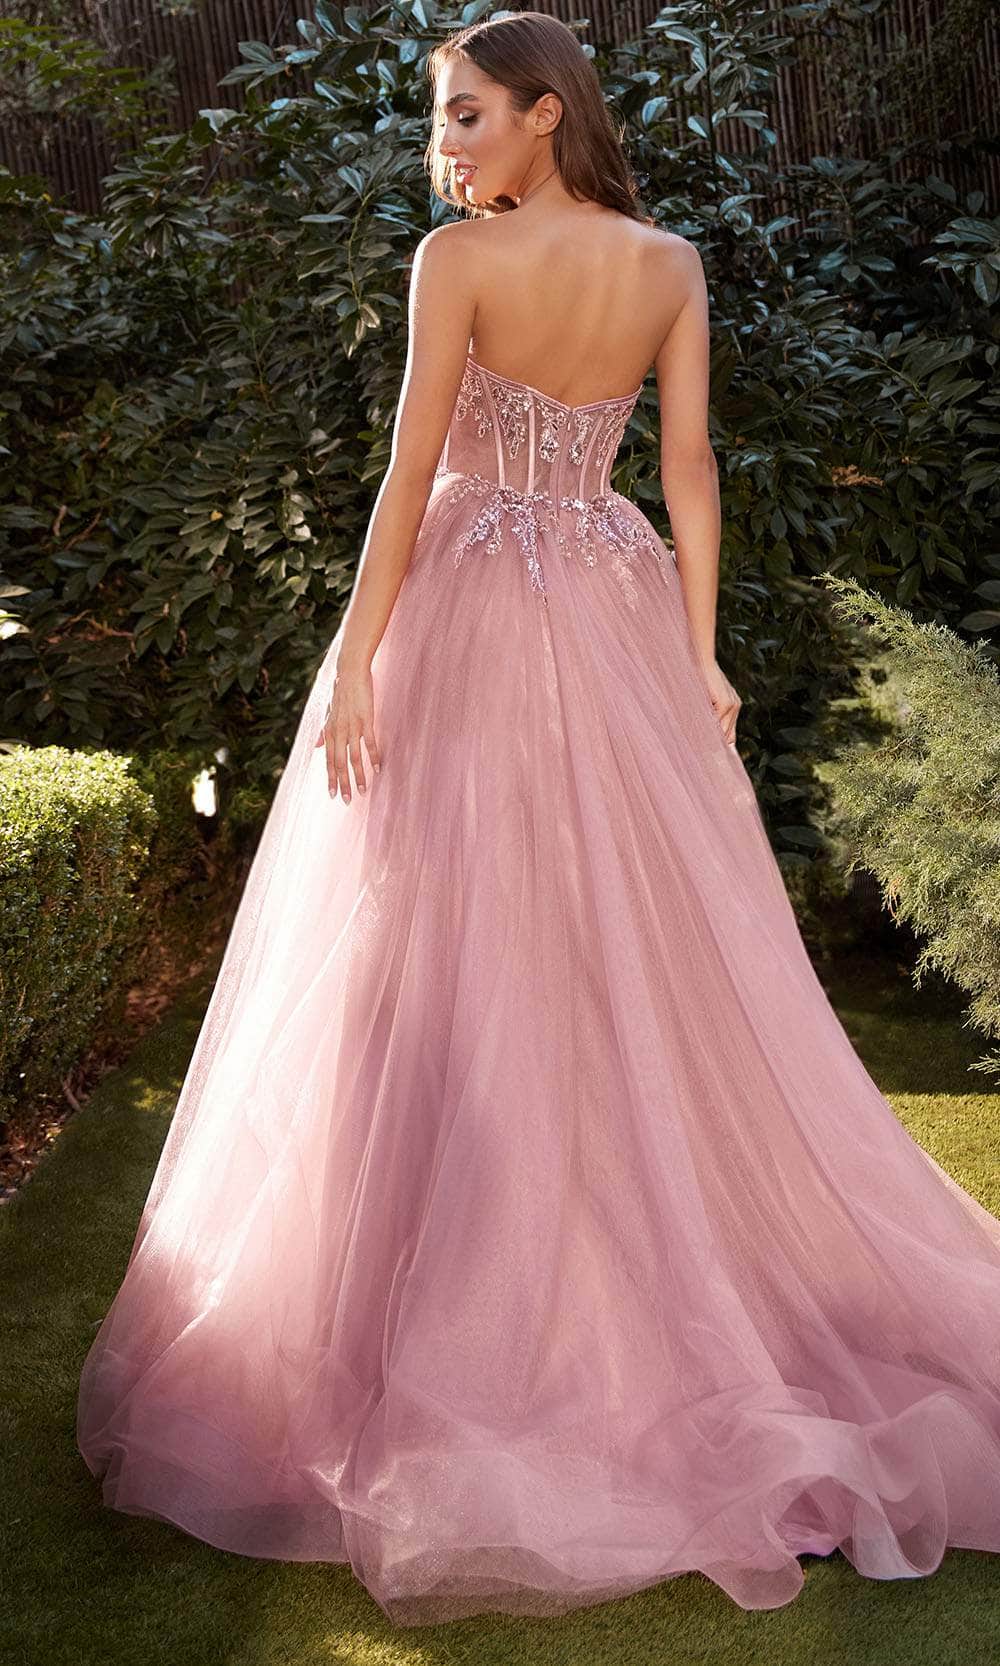 Andrea And Leo A1267 - Beaded Appliqued Evening Dress